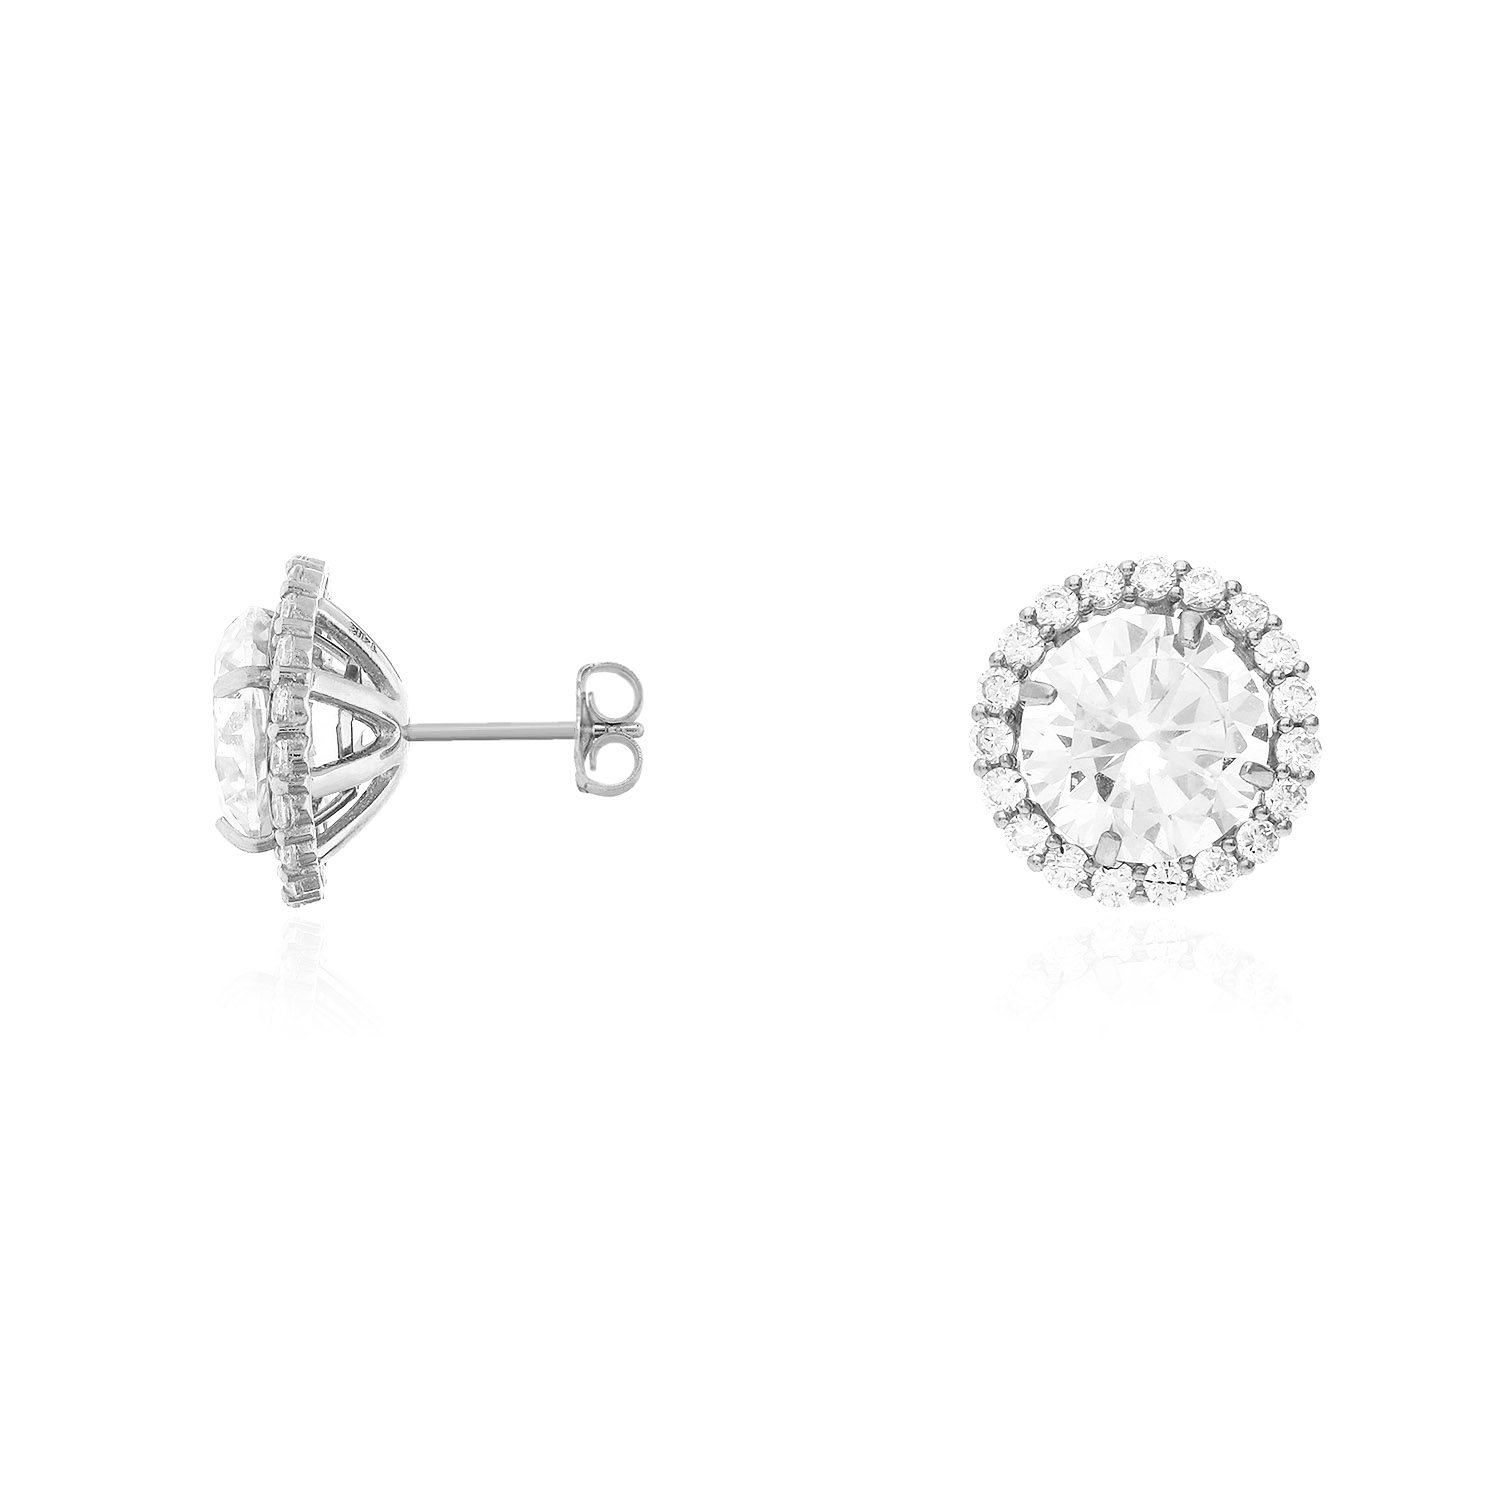 14K White Gold Created Diamond Halo Earring Jackets And Studs - image 3 of 5